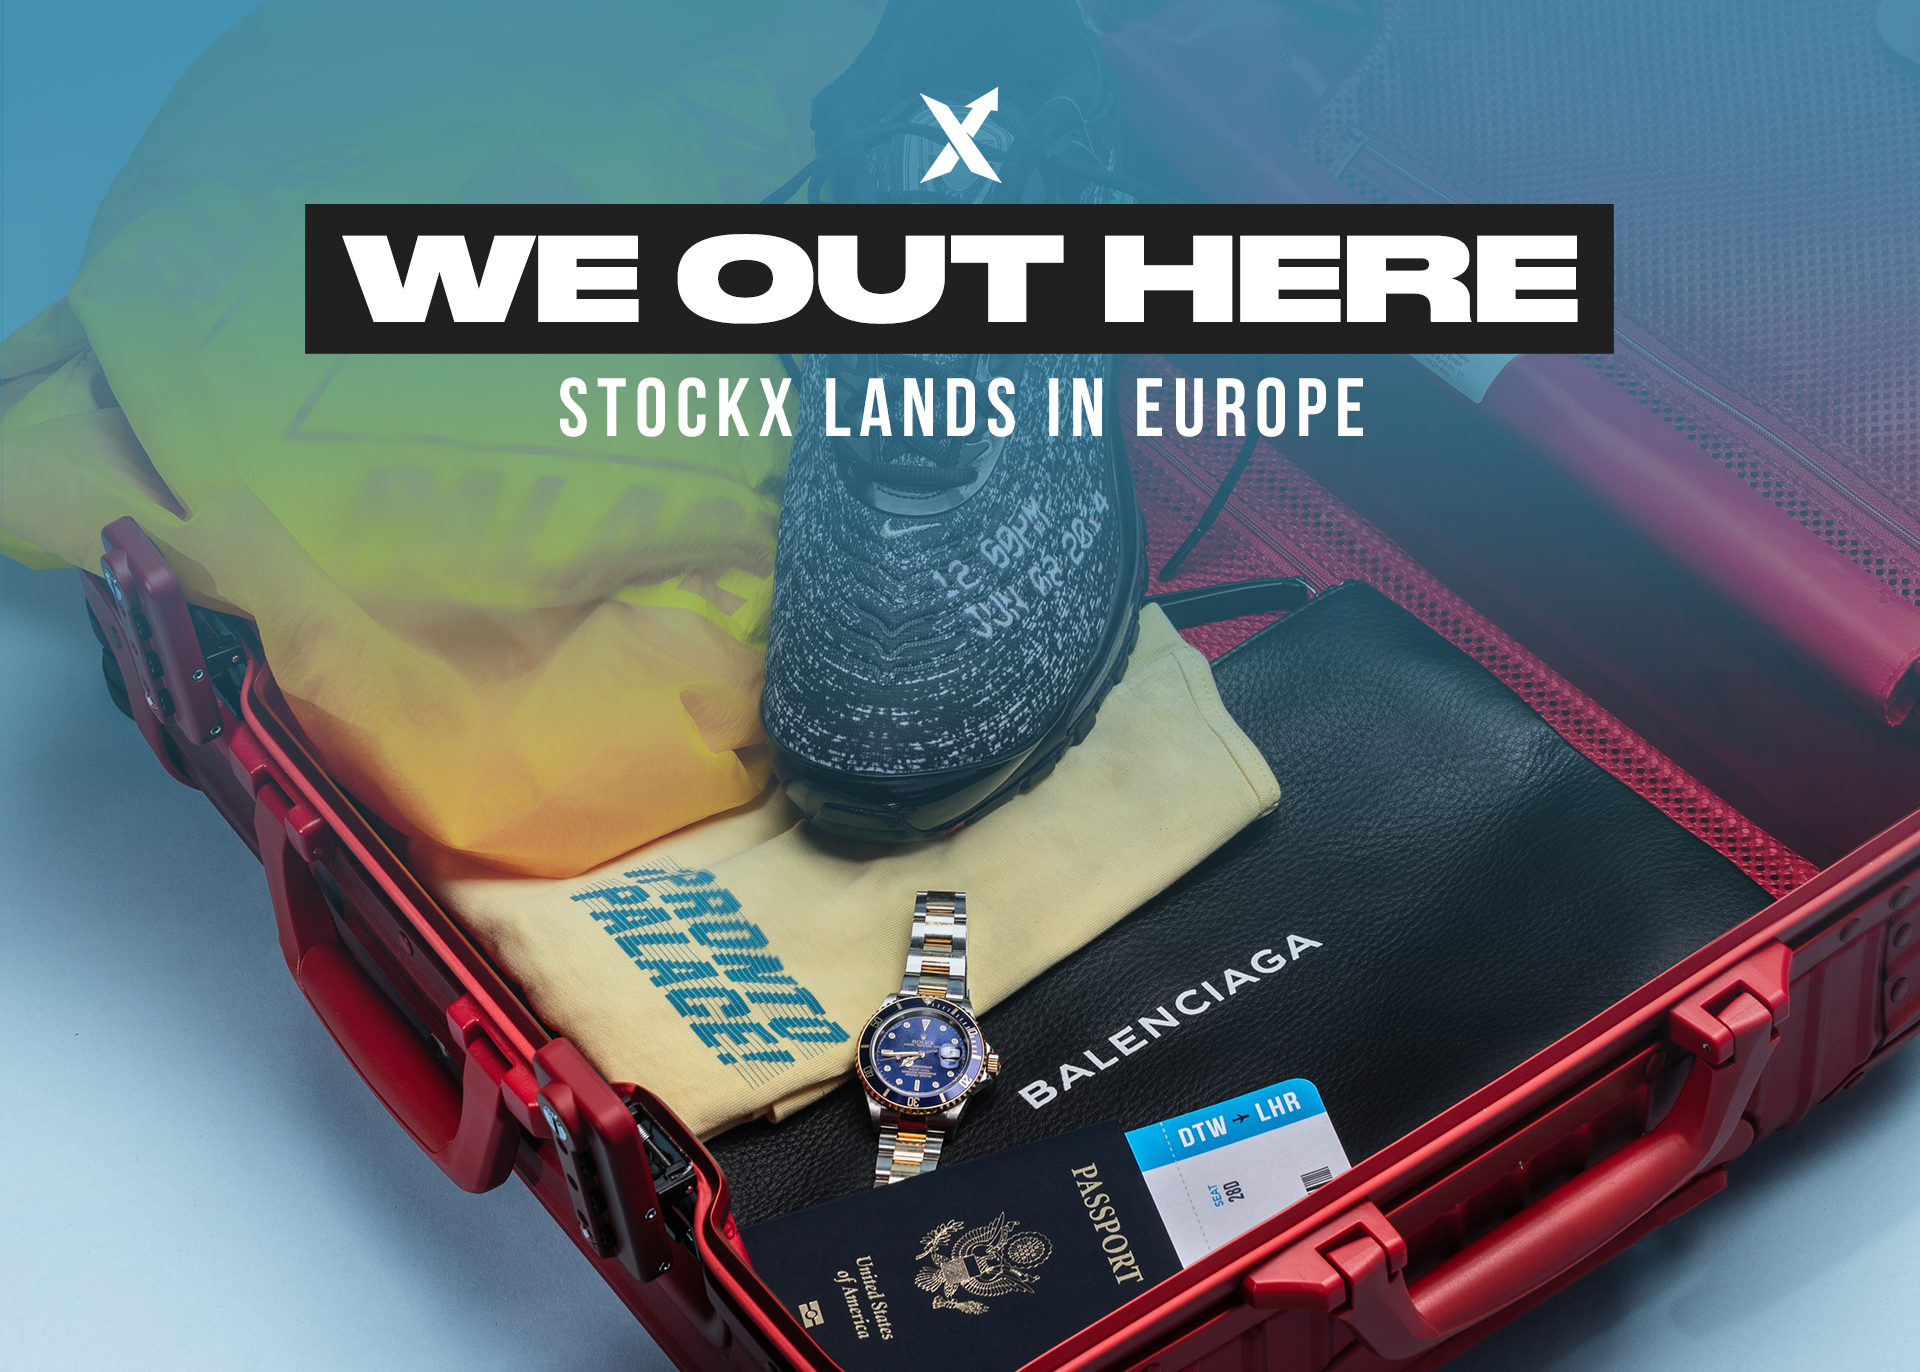 It's Official, StockX Has Landed in Europe